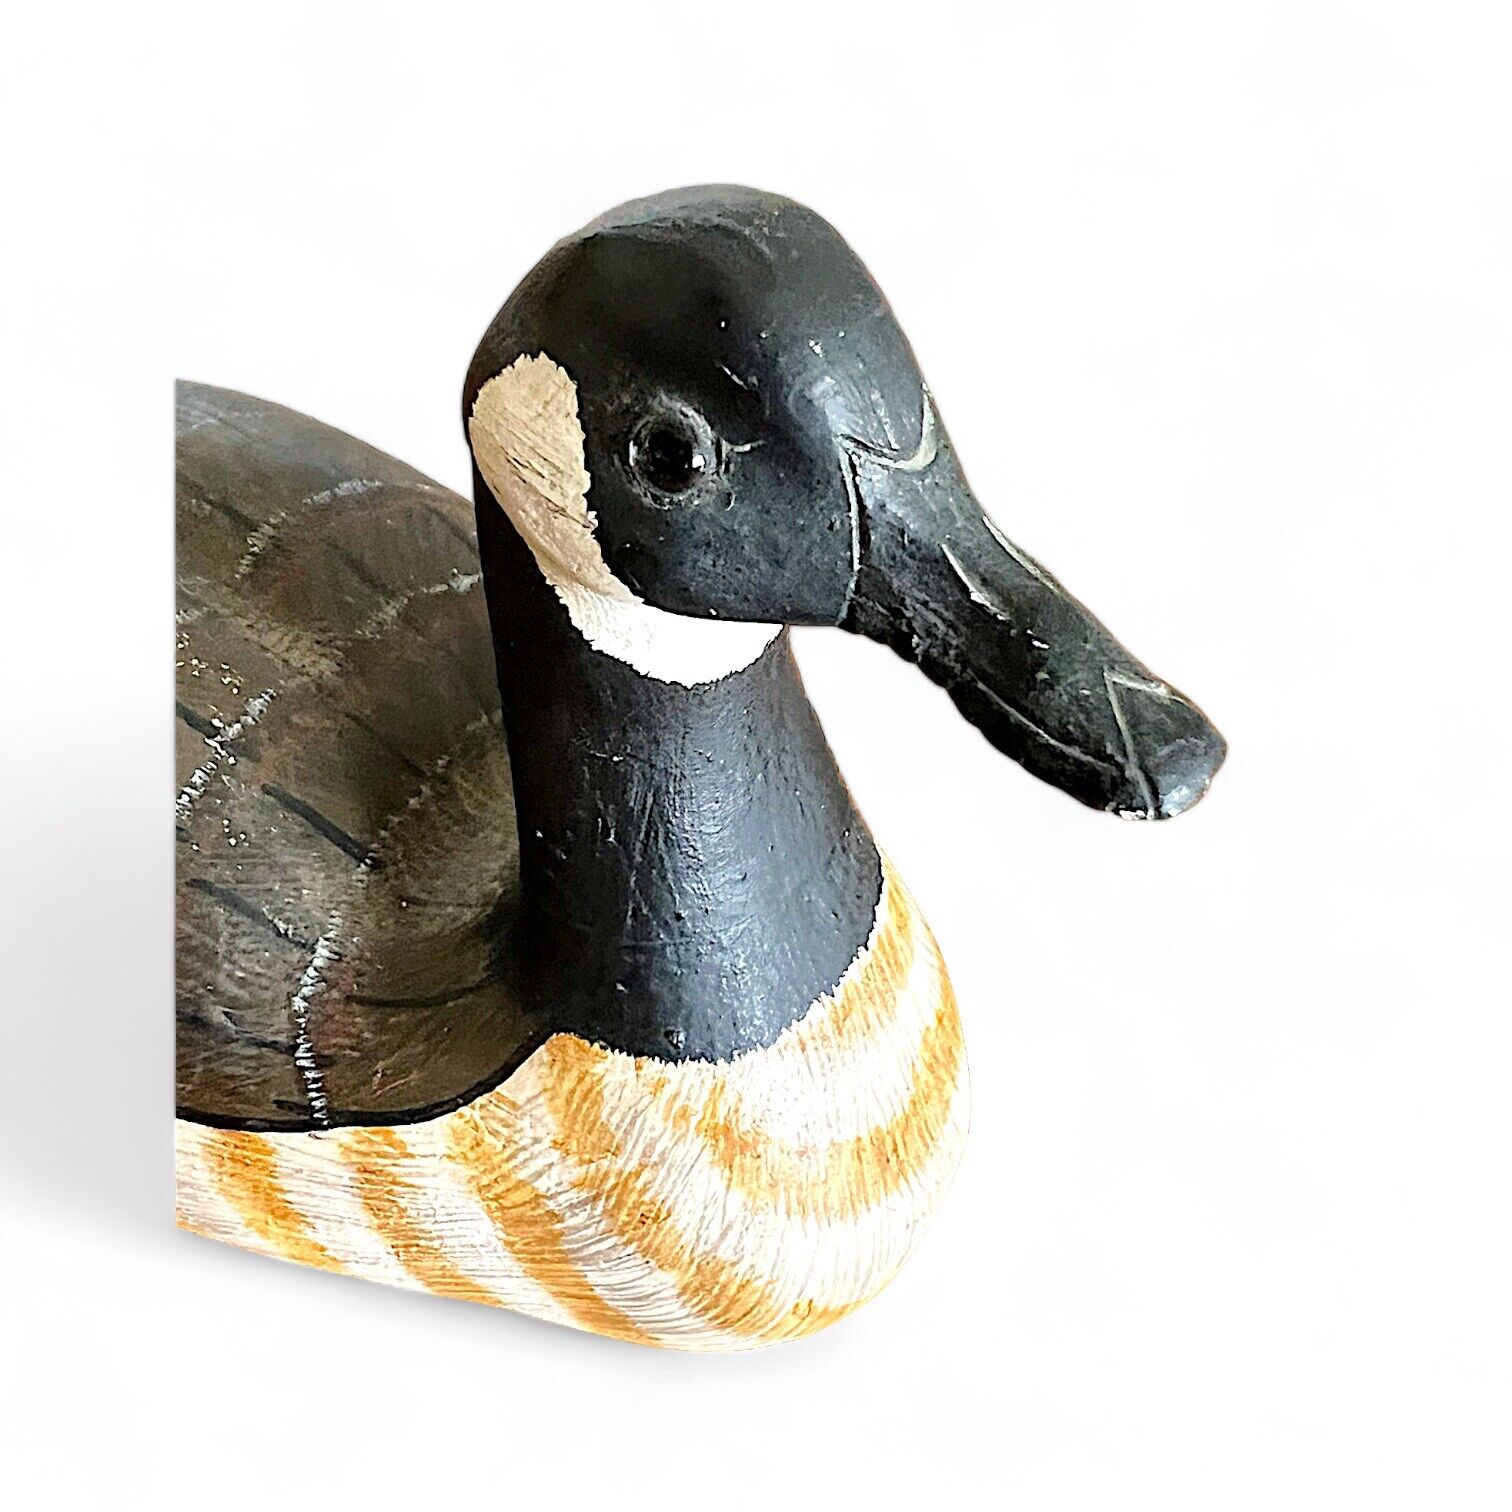 Canada Goose Carved Hand-Painted Wood Duck Decoy Interior Decor